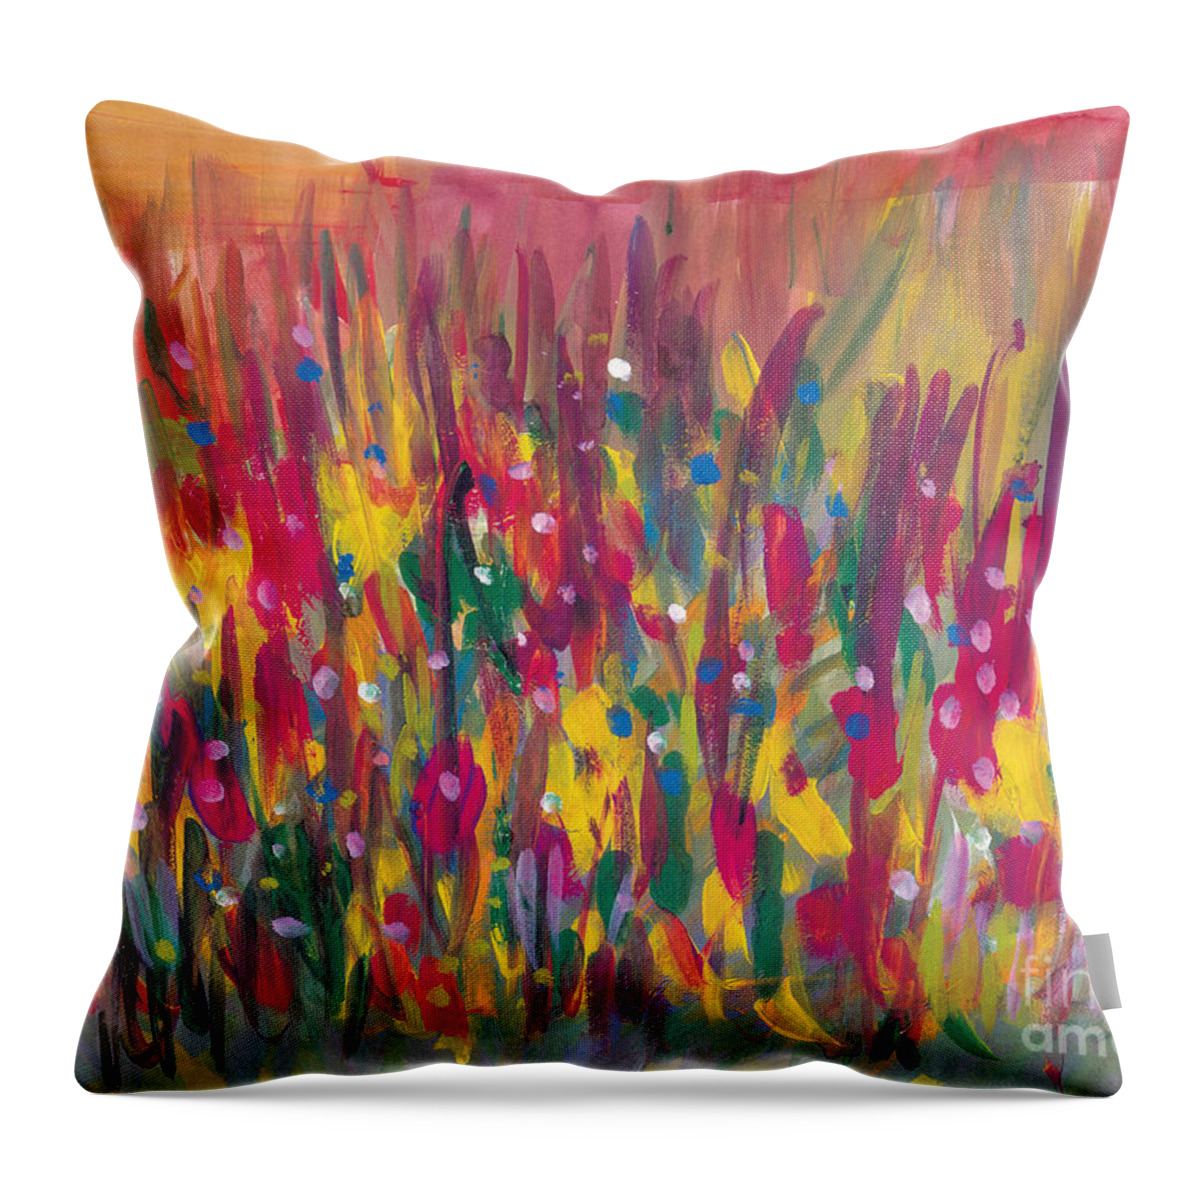 Contemporary Throw Pillow featuring the painting Distortion by Bjorn Sjogren